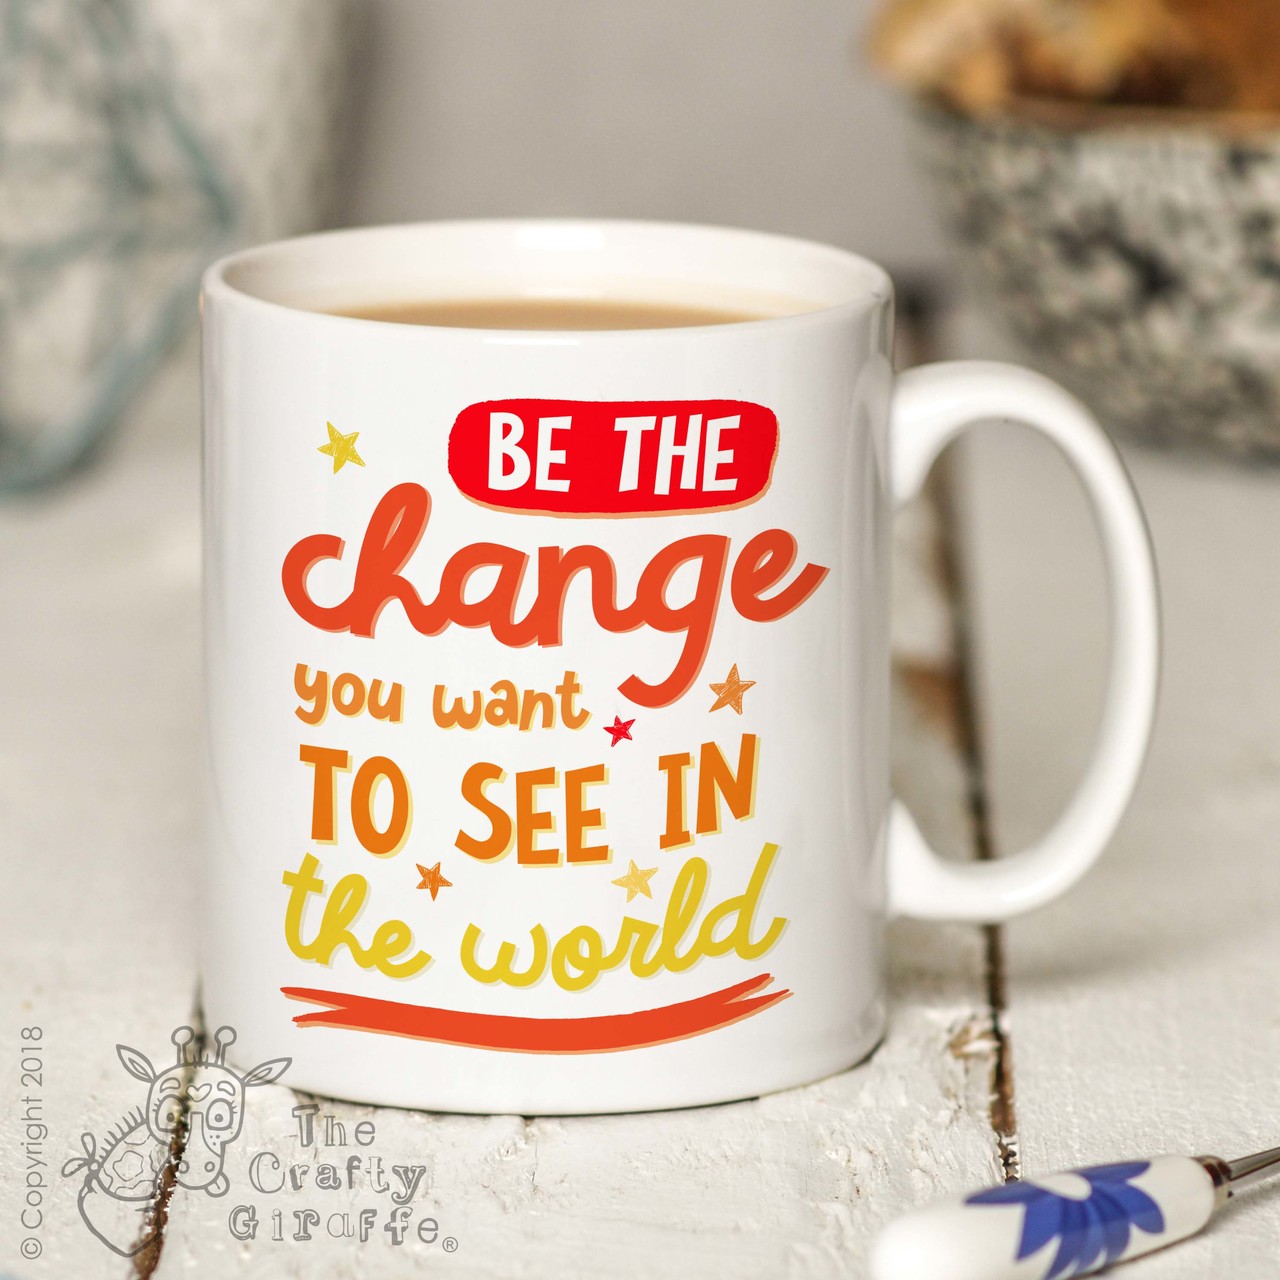 Be the change you want to see in the world Mug